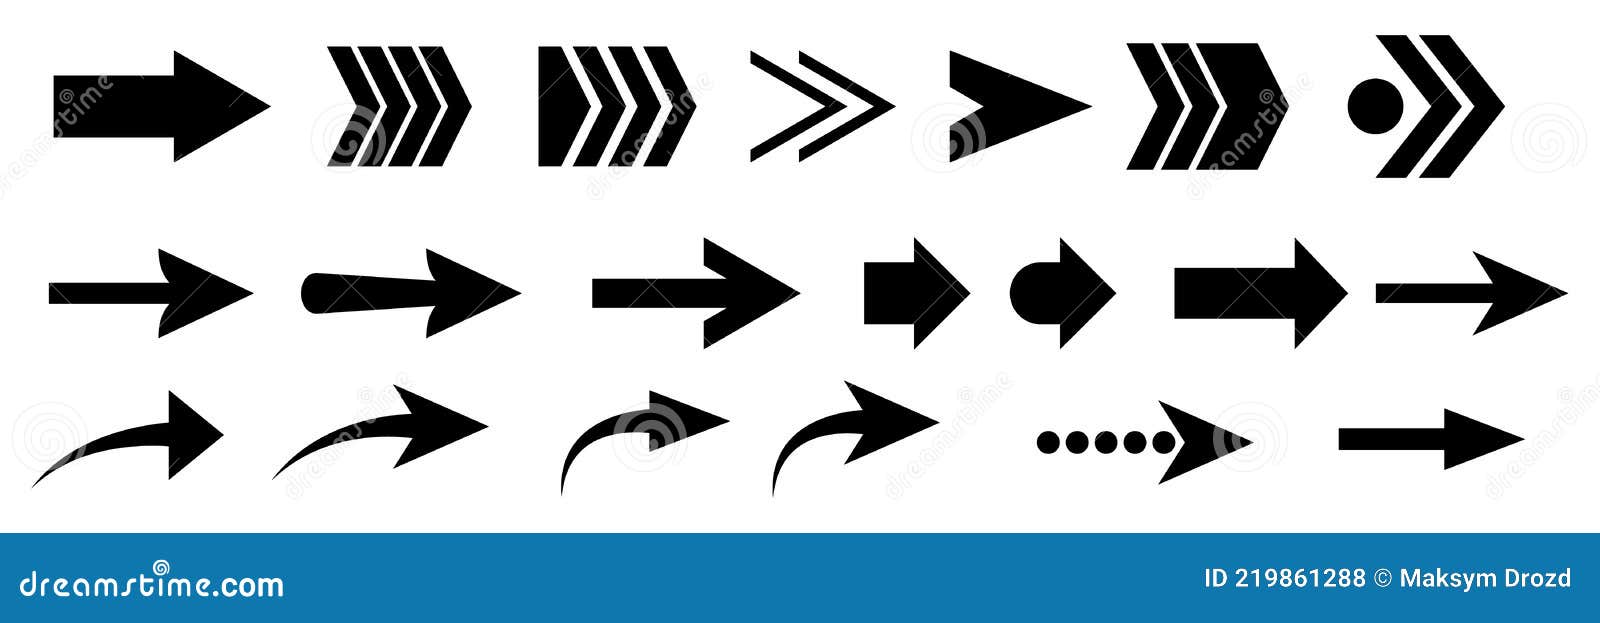 set of  arrow icons. collection of pointers.